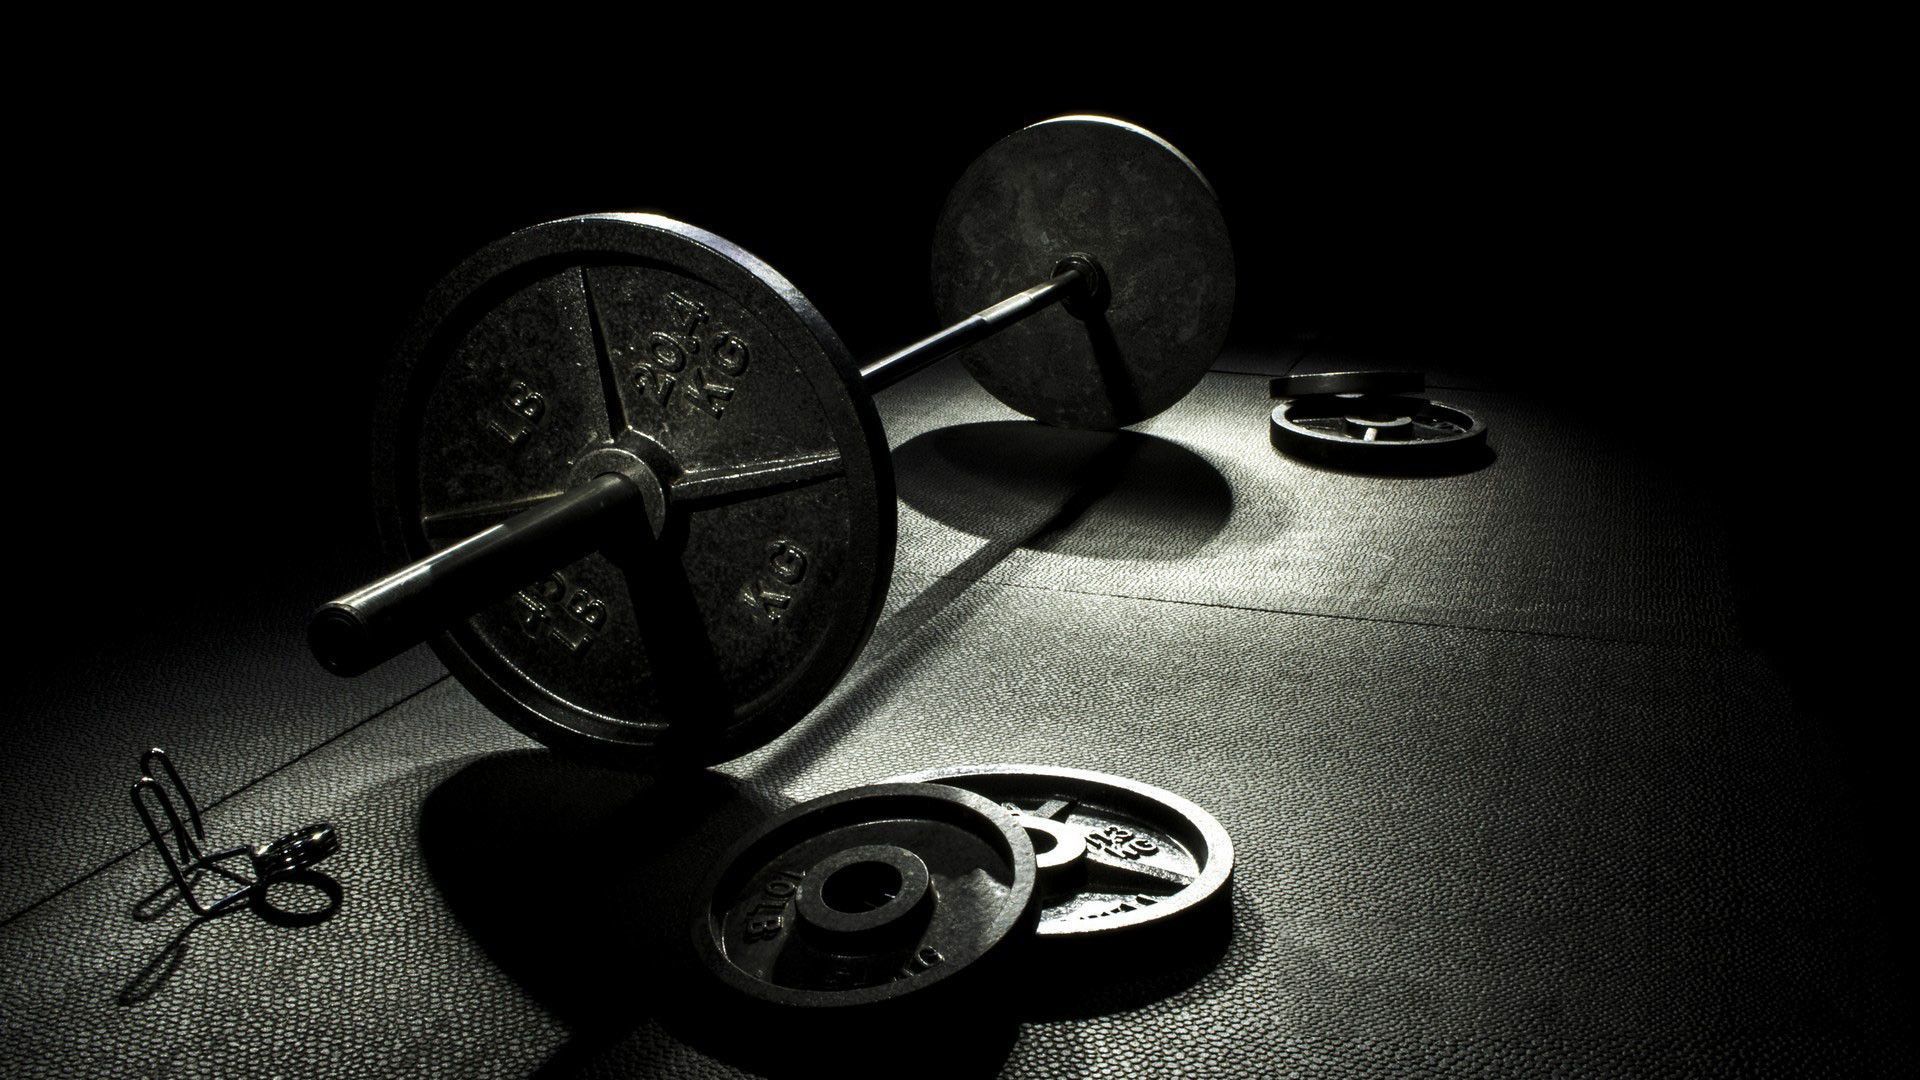 Weightlifting Wallpaper Free. Workout .com